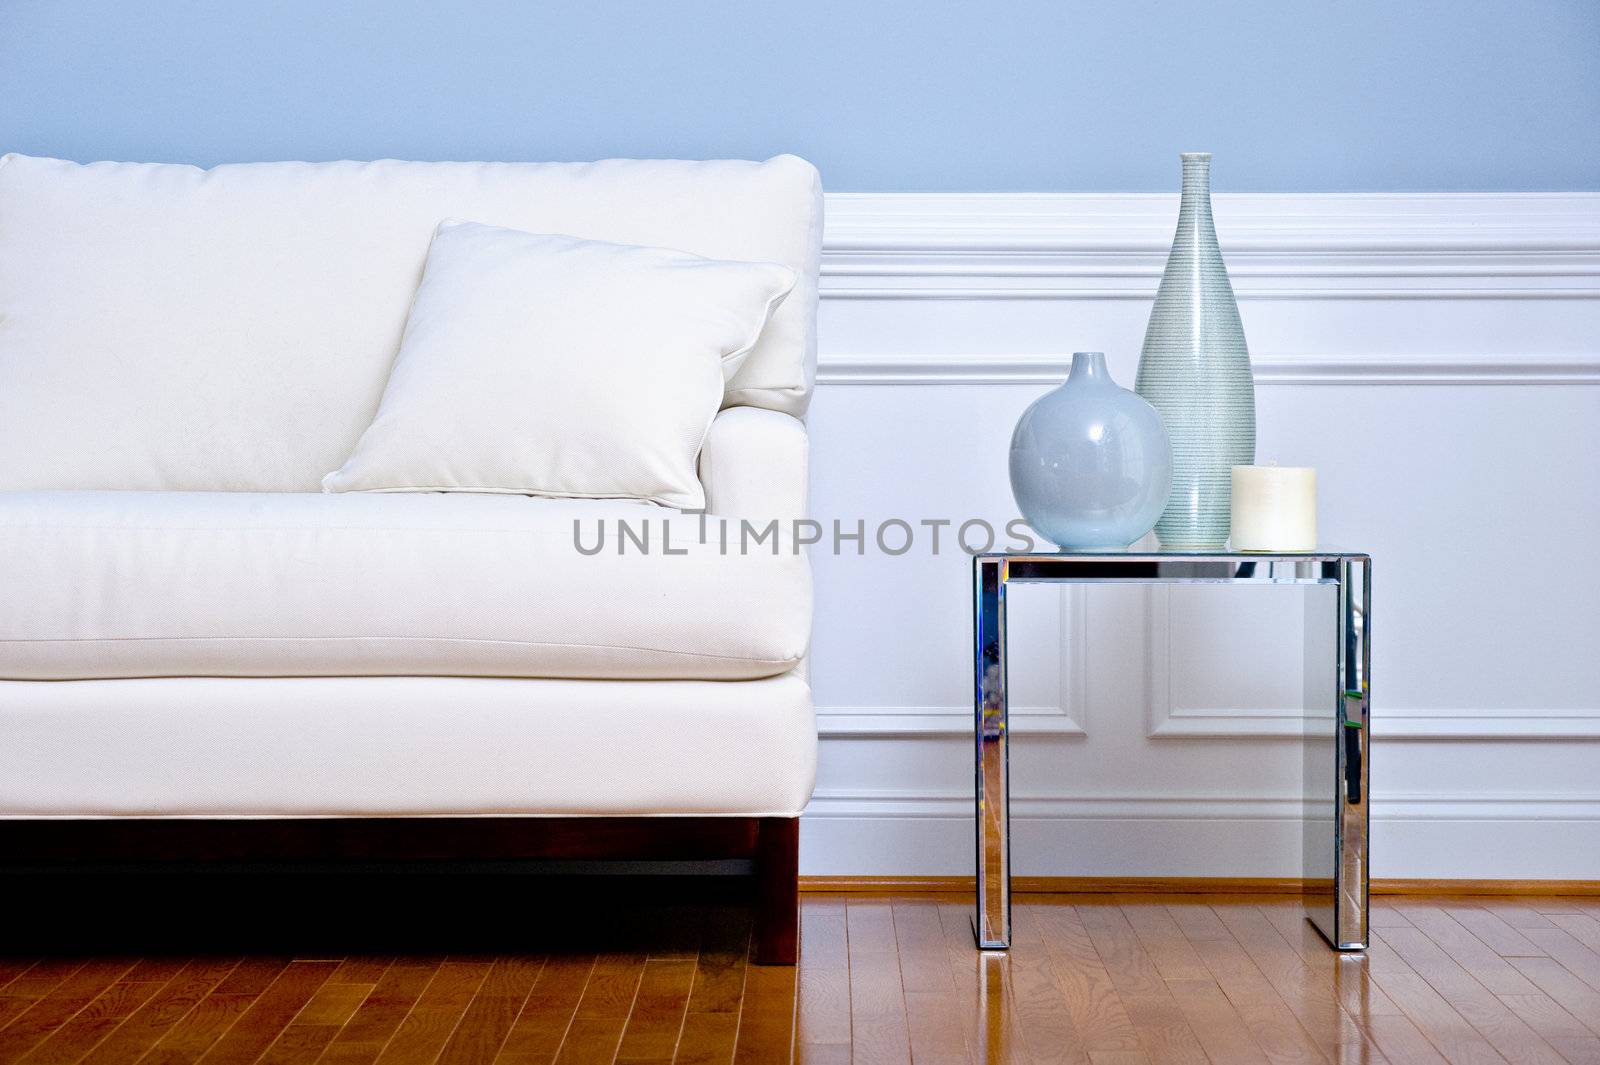 Cropped view of white couch and side table with vases, in a living room with a wood floor. Horizontal format.